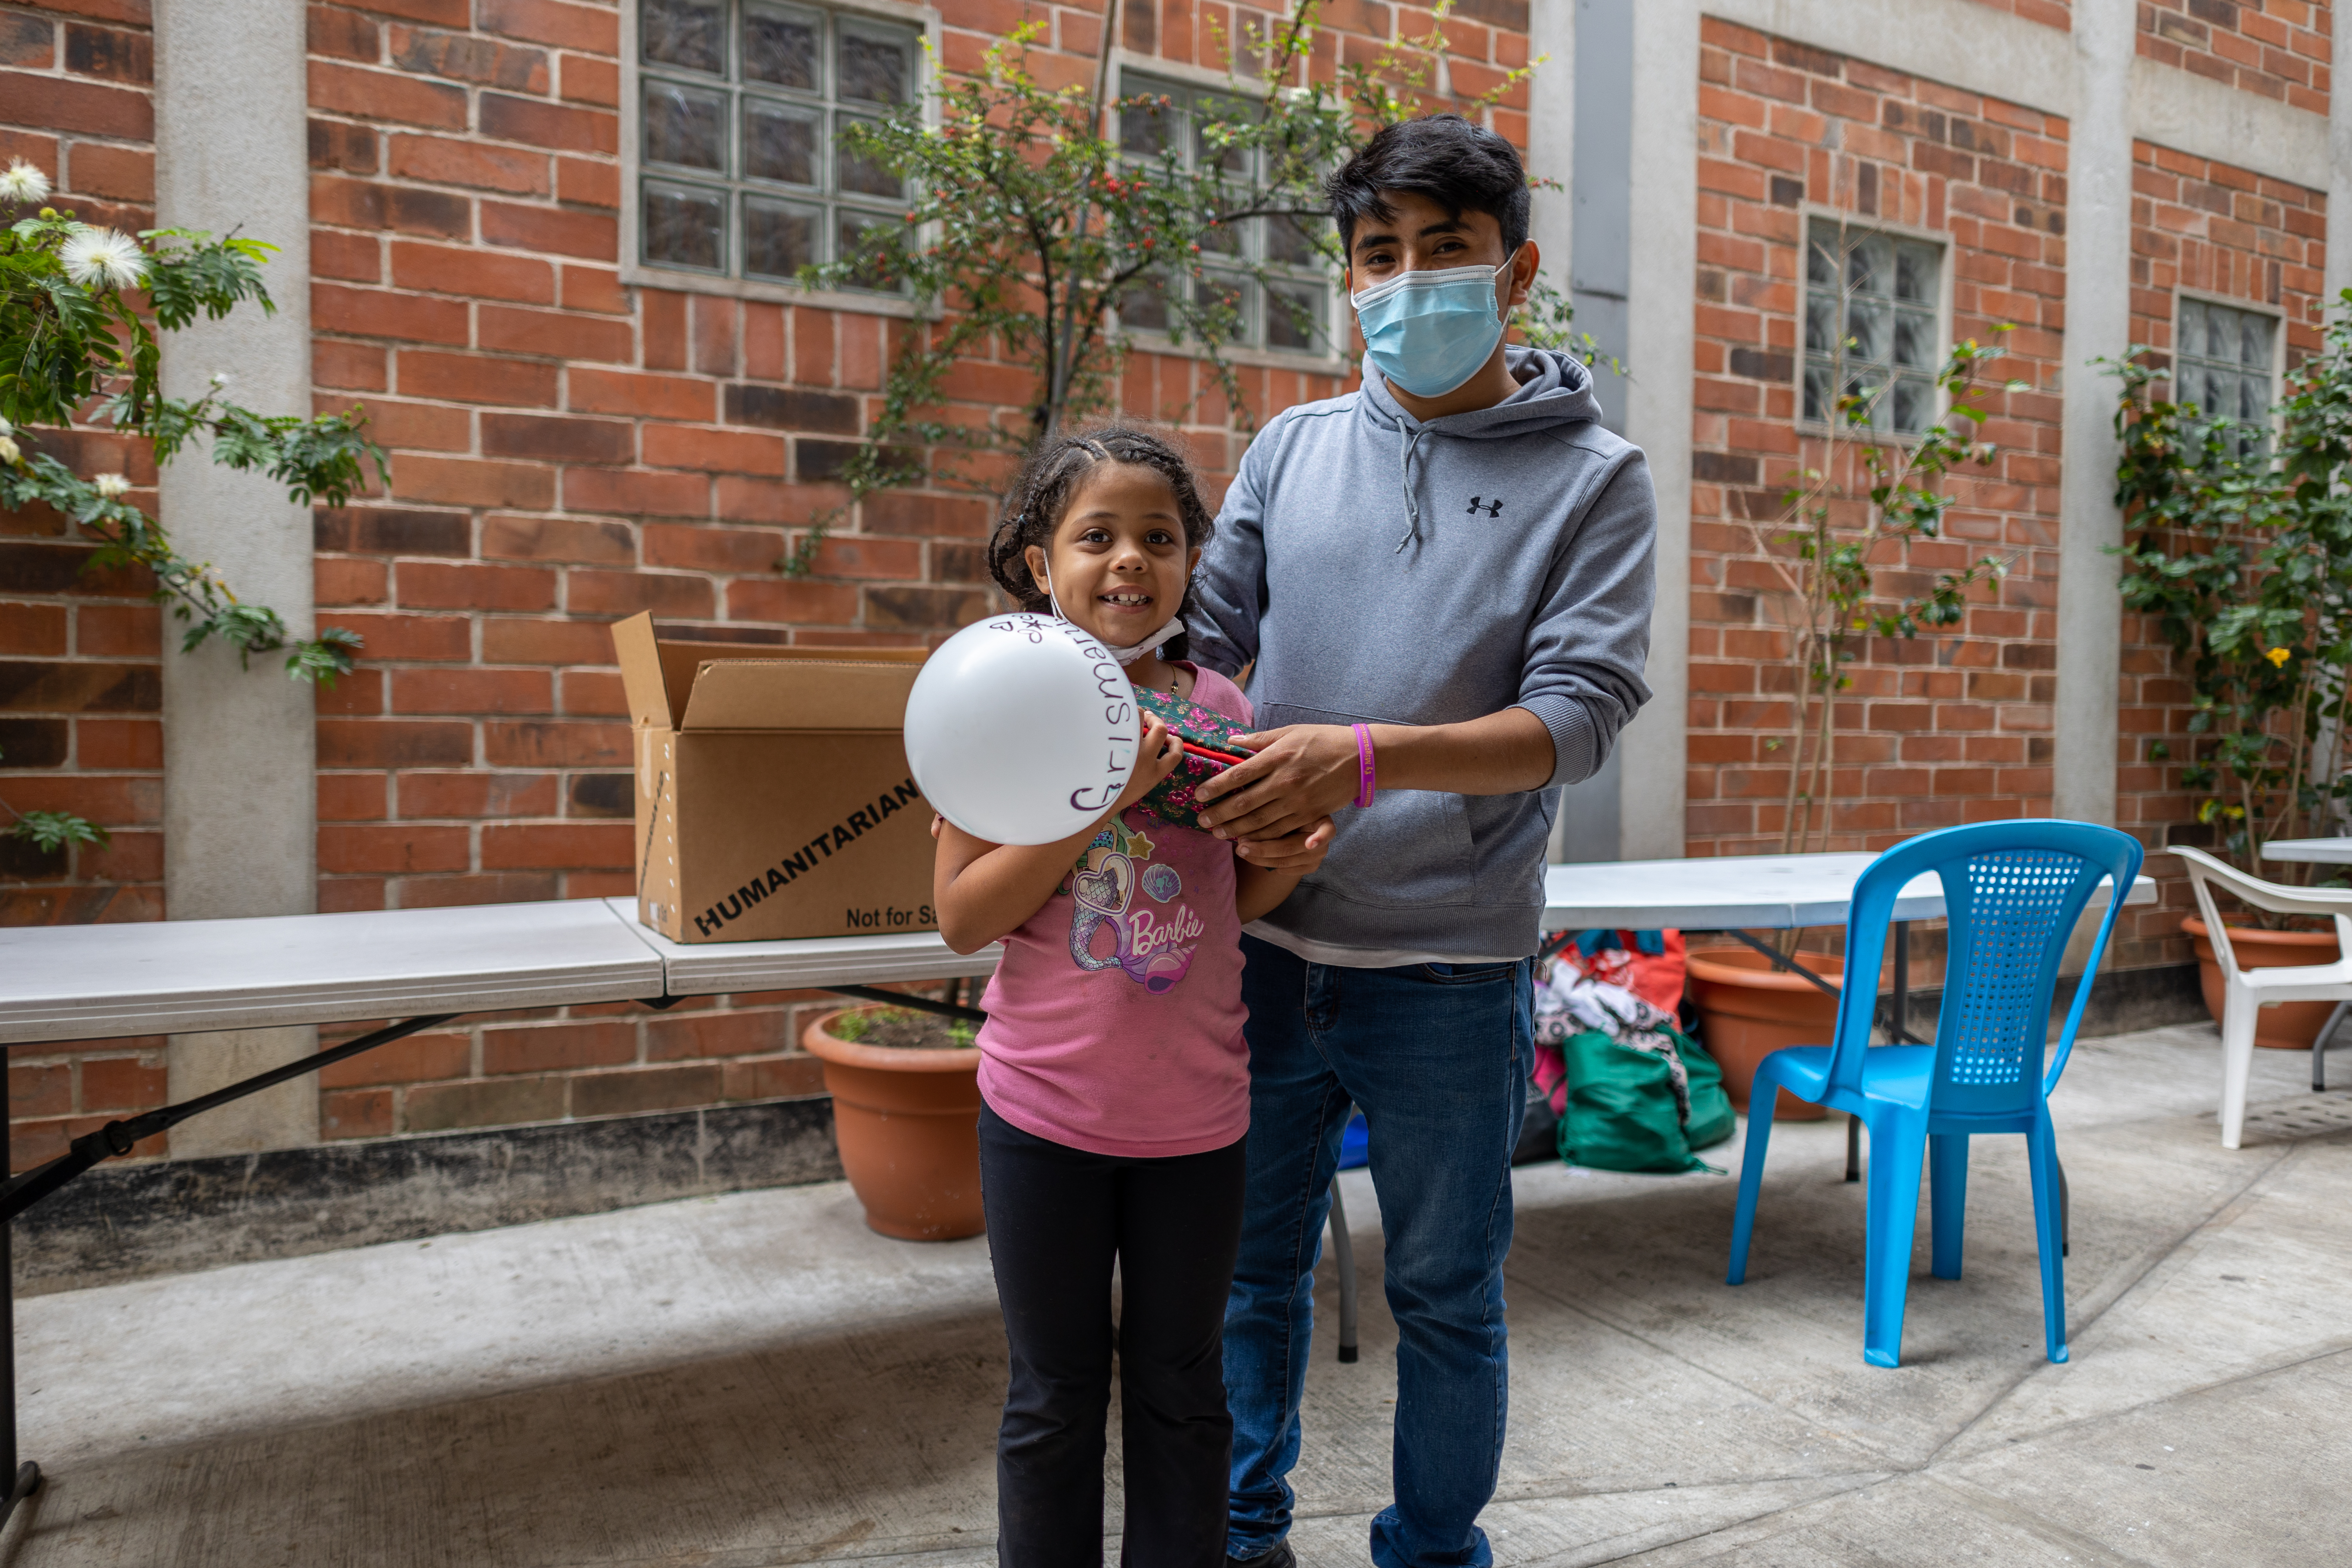 Hector Pablo, staff, hands out a hygeine kit to Crismary Olarfe at Casa del Migrante in Guatemala City.